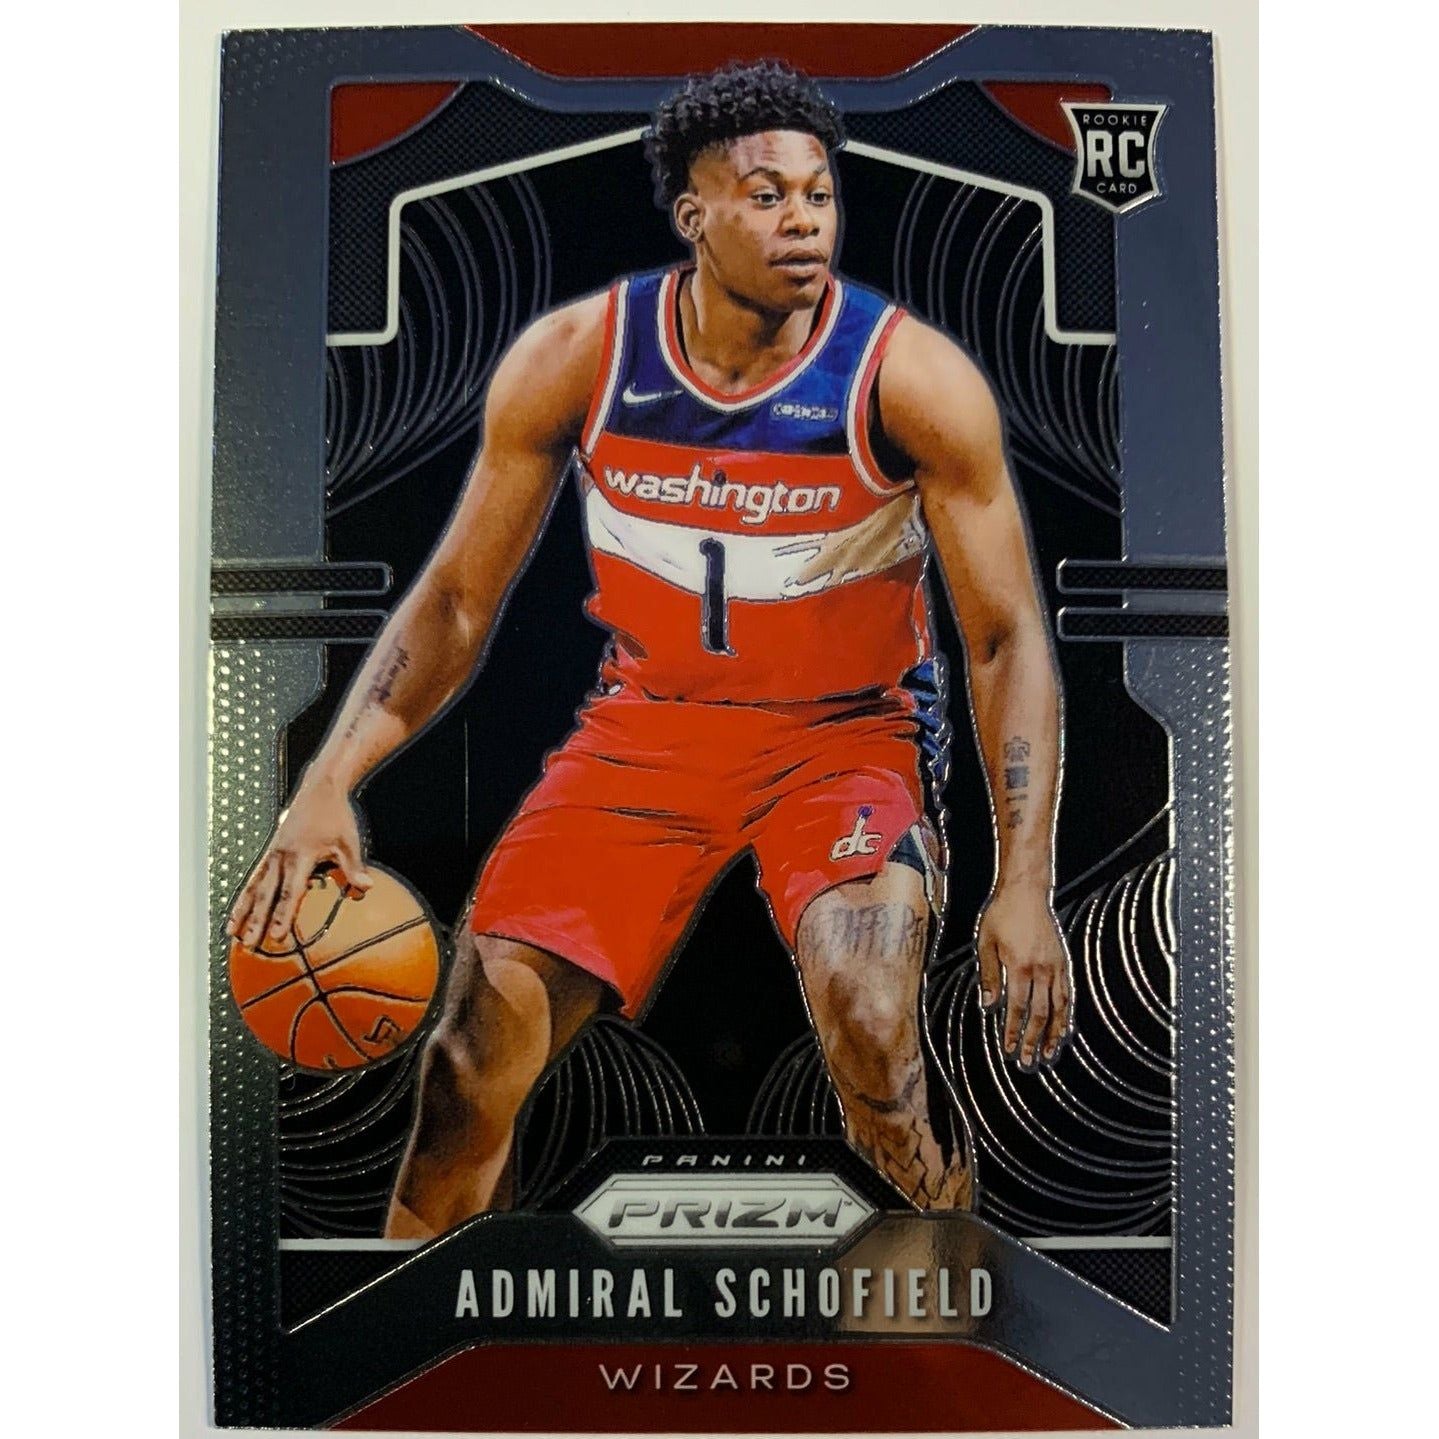  2019-20 Panini Prizm Admiral Schofield RC  Local Legends Cards & Collectibles